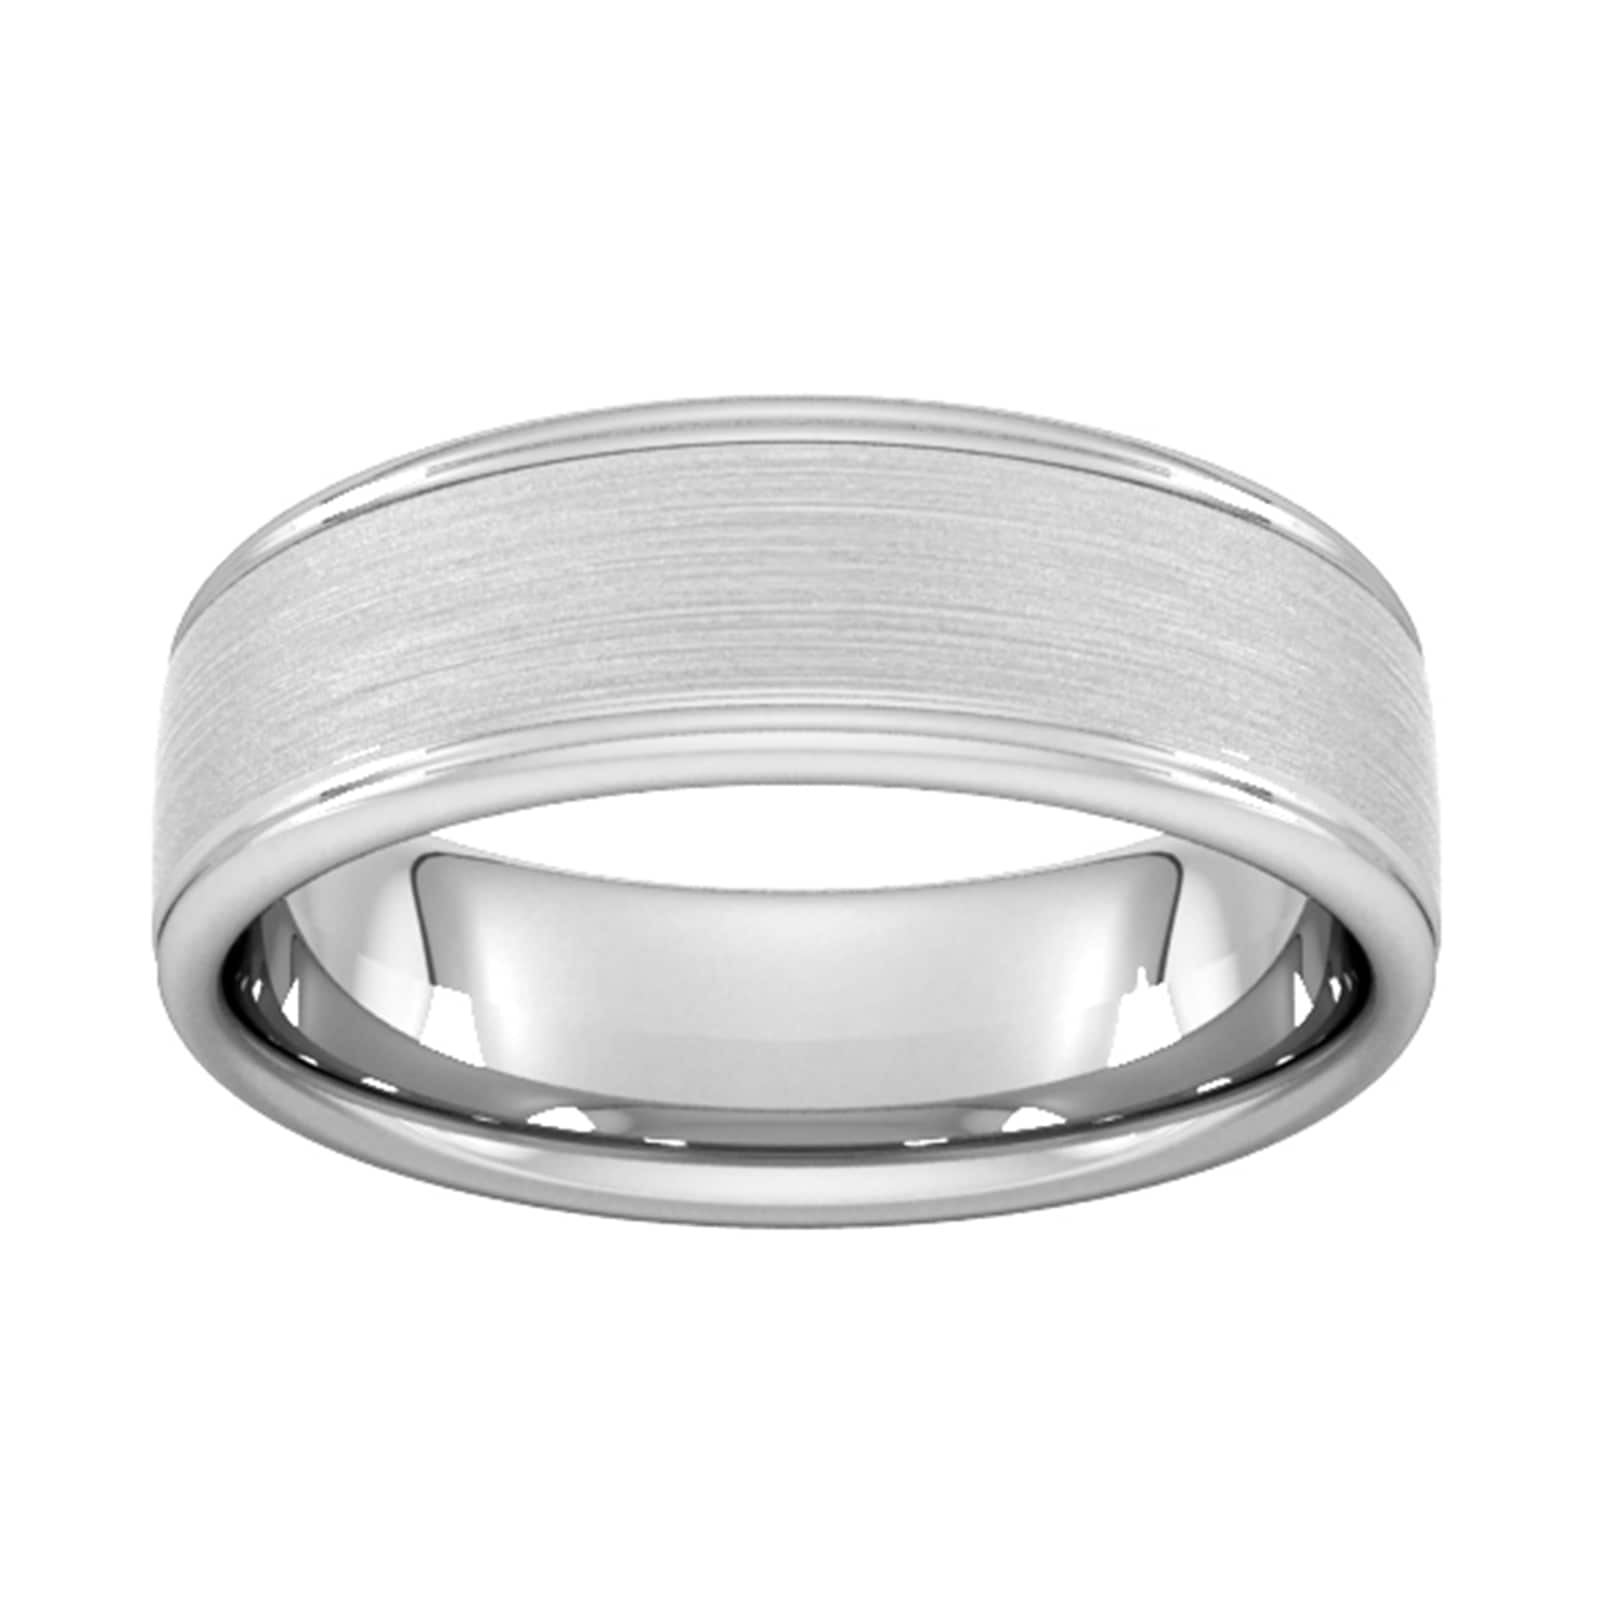 7mm Slight Court Extra Heavy Matt Centre With Grooves Wedding Ring In 18 Carat White Gold - Ring Size M